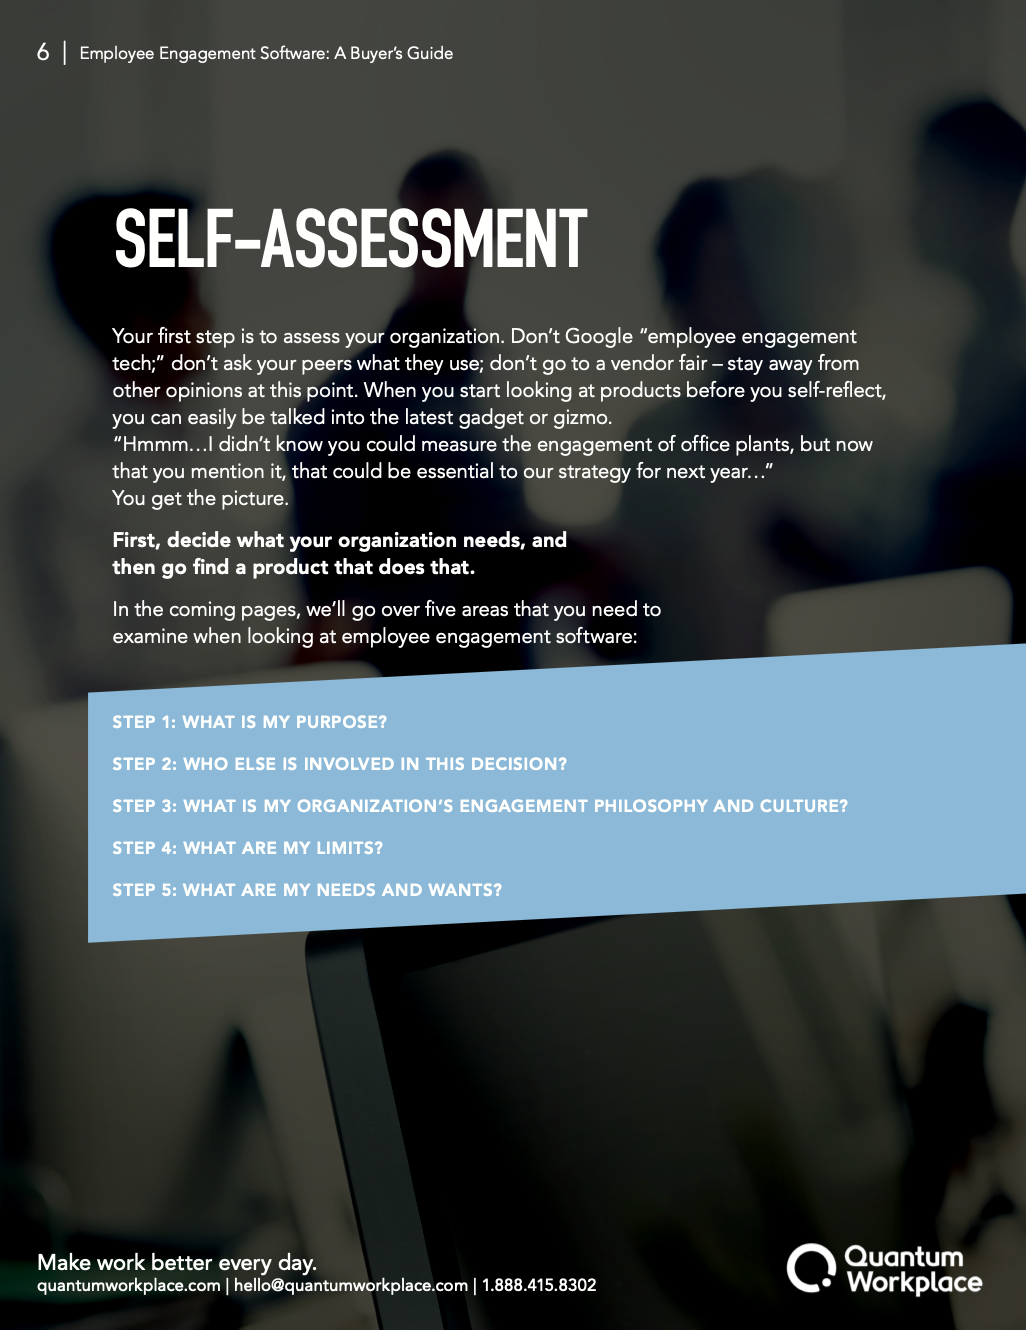 buyers-guide-self-assessment